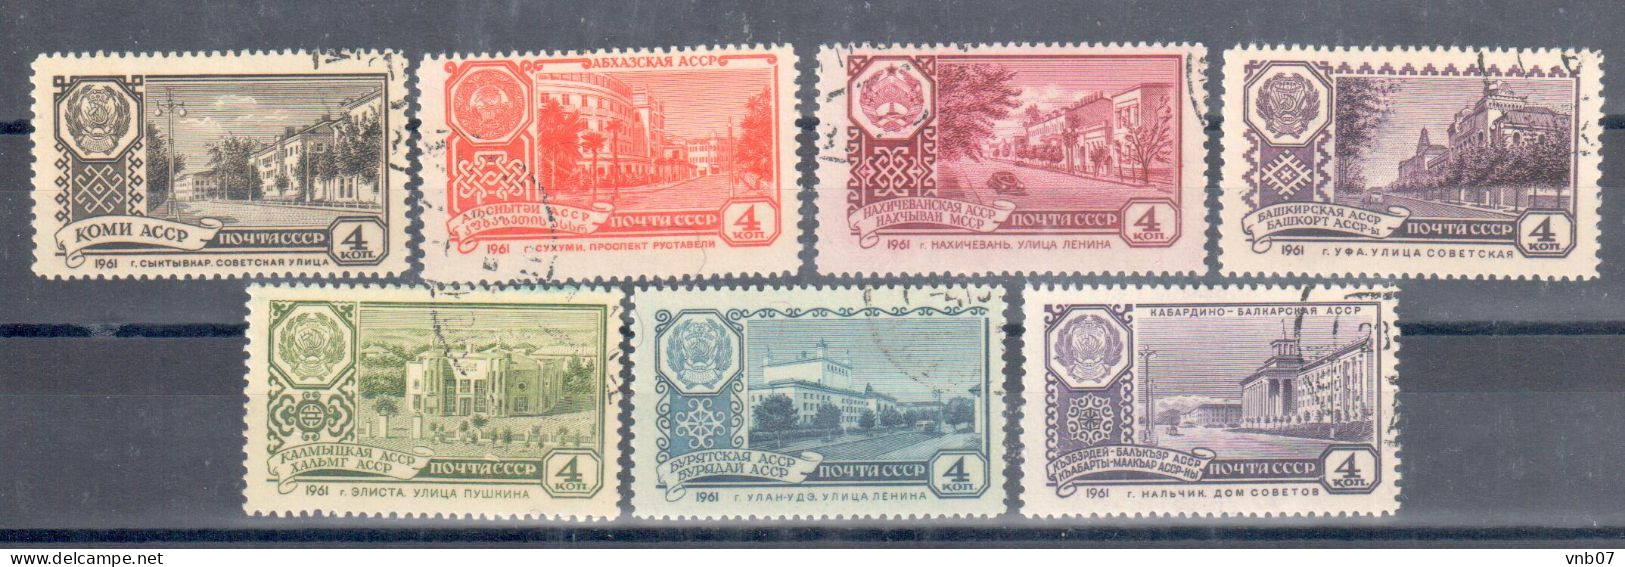 Russia USSR 1961, Sc#2338-2344, Mi#2488/2554. Capitals Of Soviet Republics. Incomplete Set. CTO. - Used Stamps